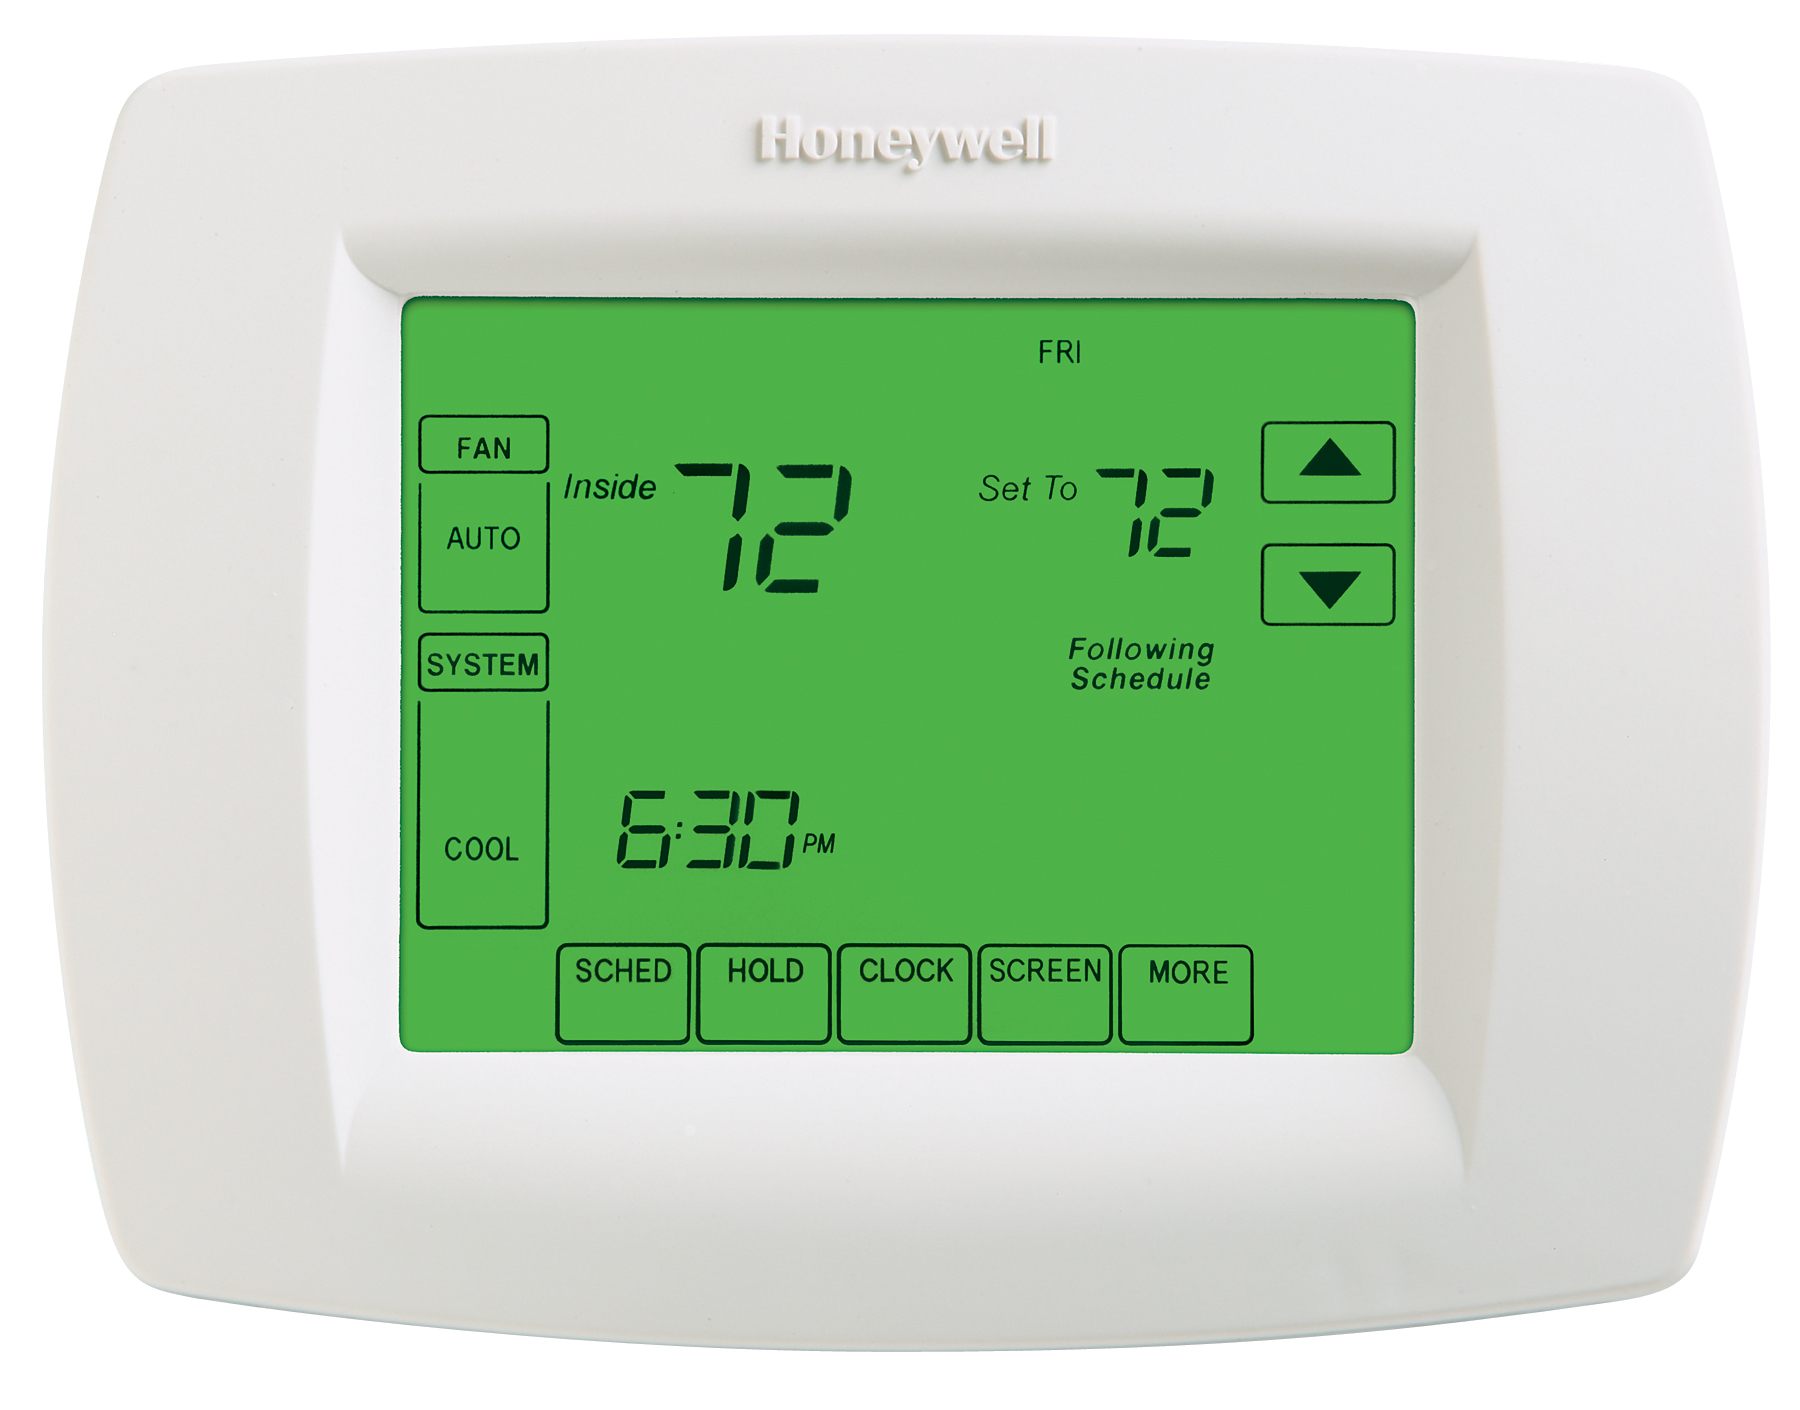 heat-pump-thermostats-maritime-geothermal